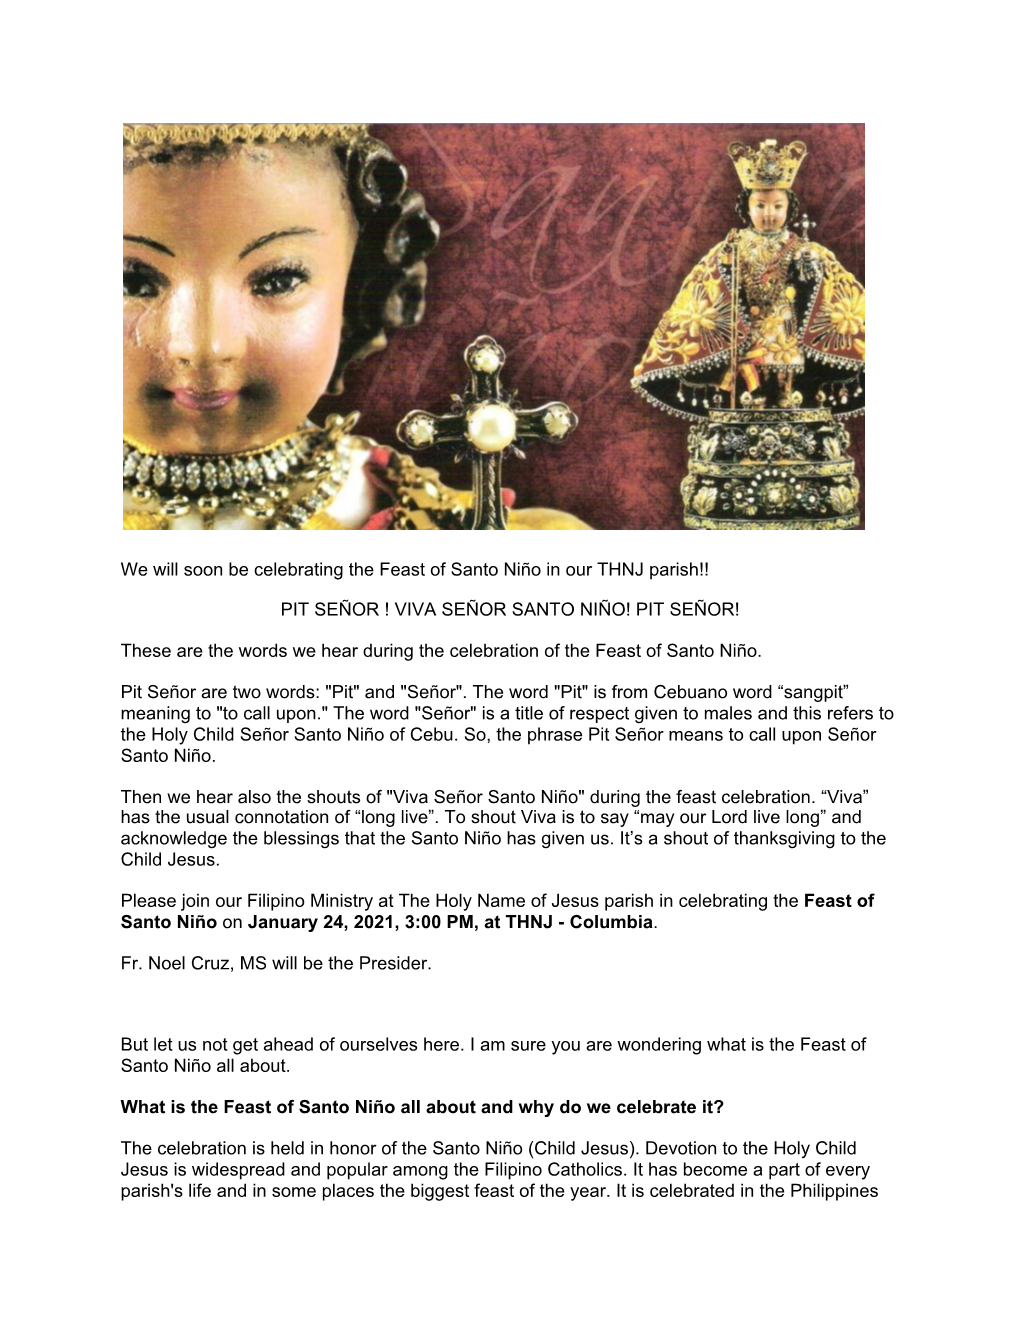 We Will Soon Be Celebrating the Feast of Santo Niño in Our THNJ Parish!!